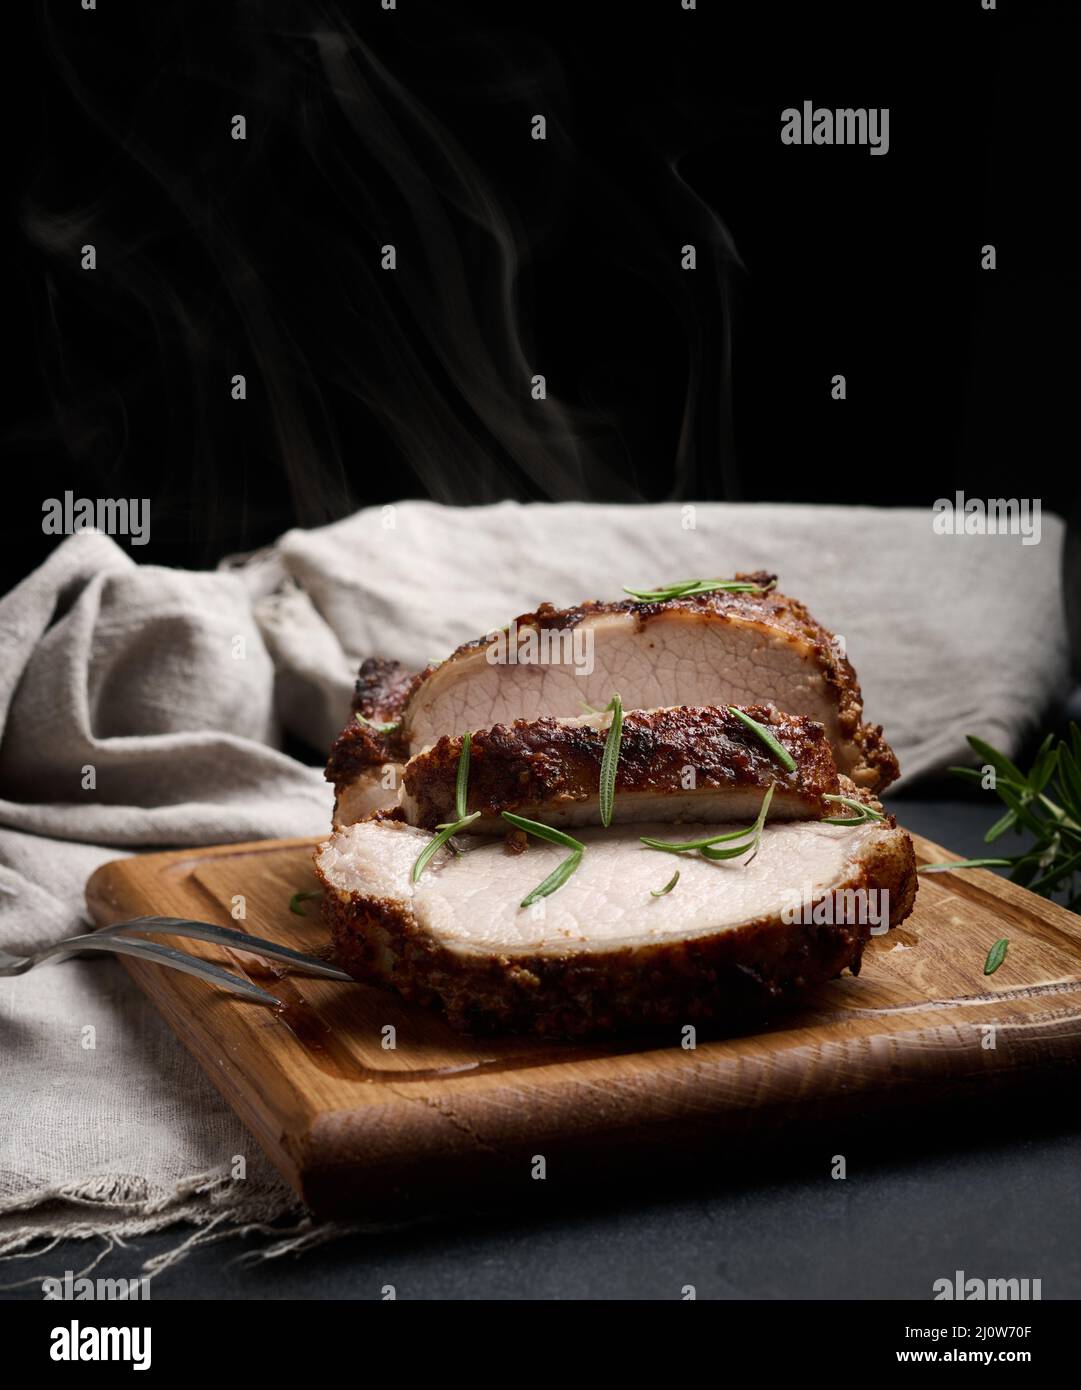 Baked piece of pork meat in spices on a wooden board, cut into pieces. Eye of round roast steak Stock Photo